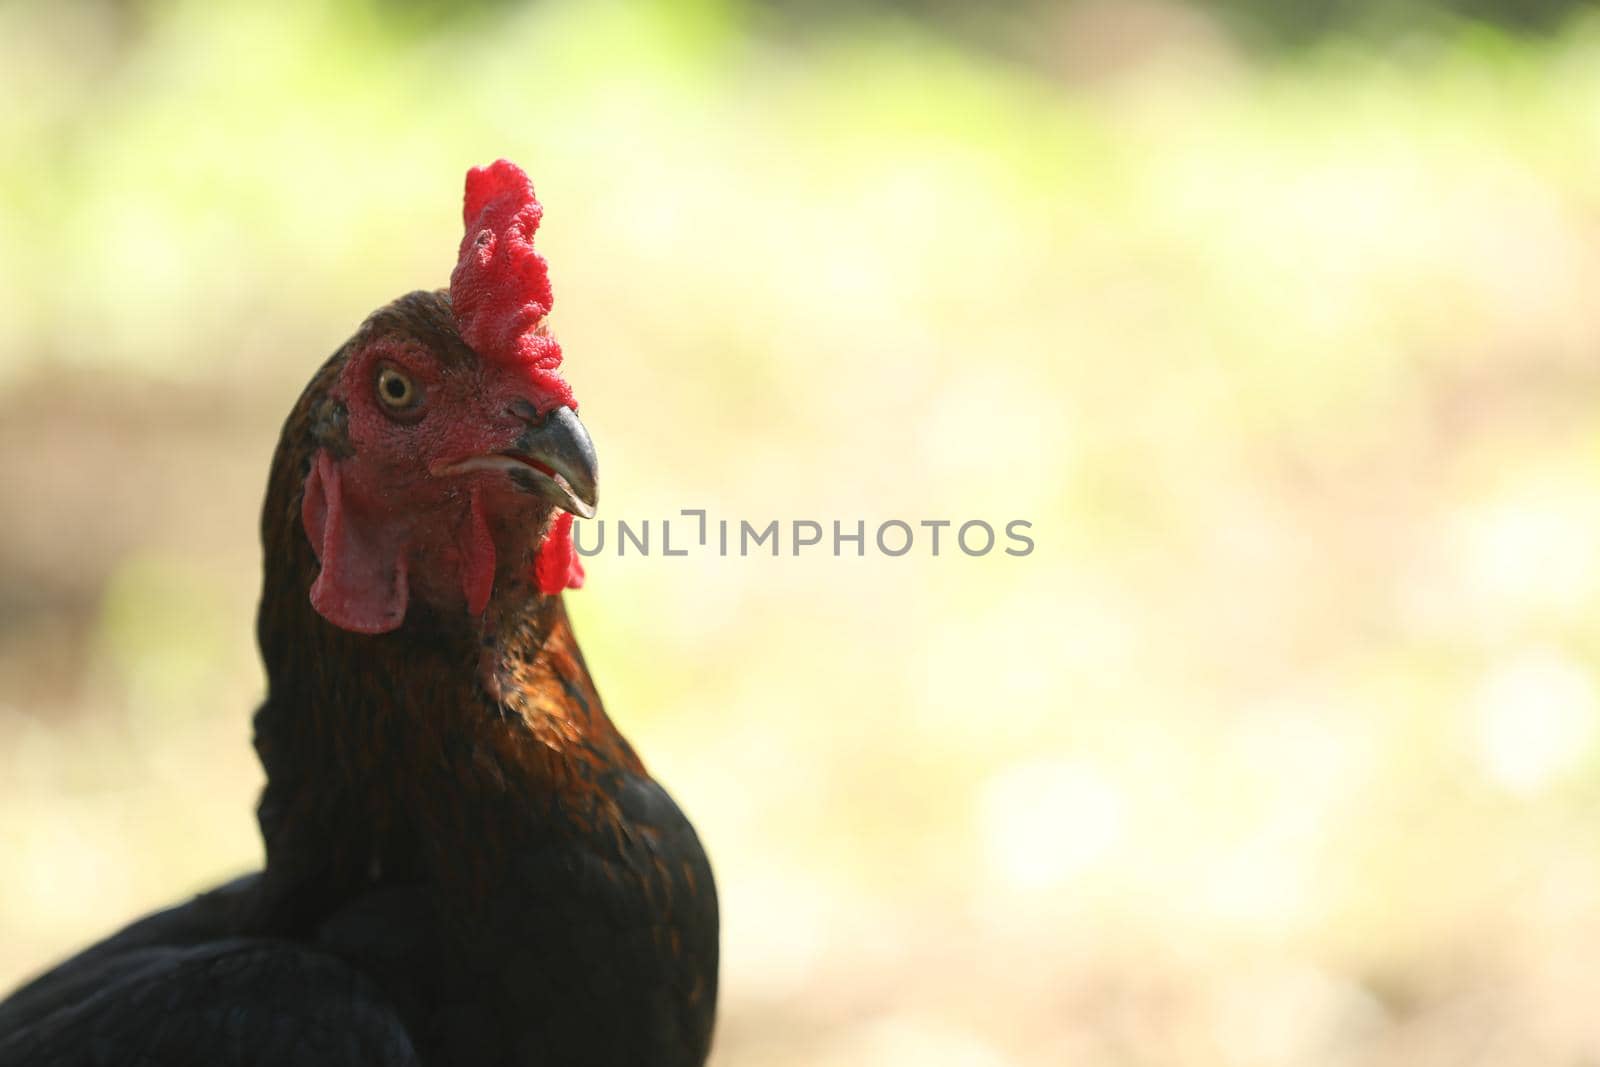 Indian Rooster at rural Home